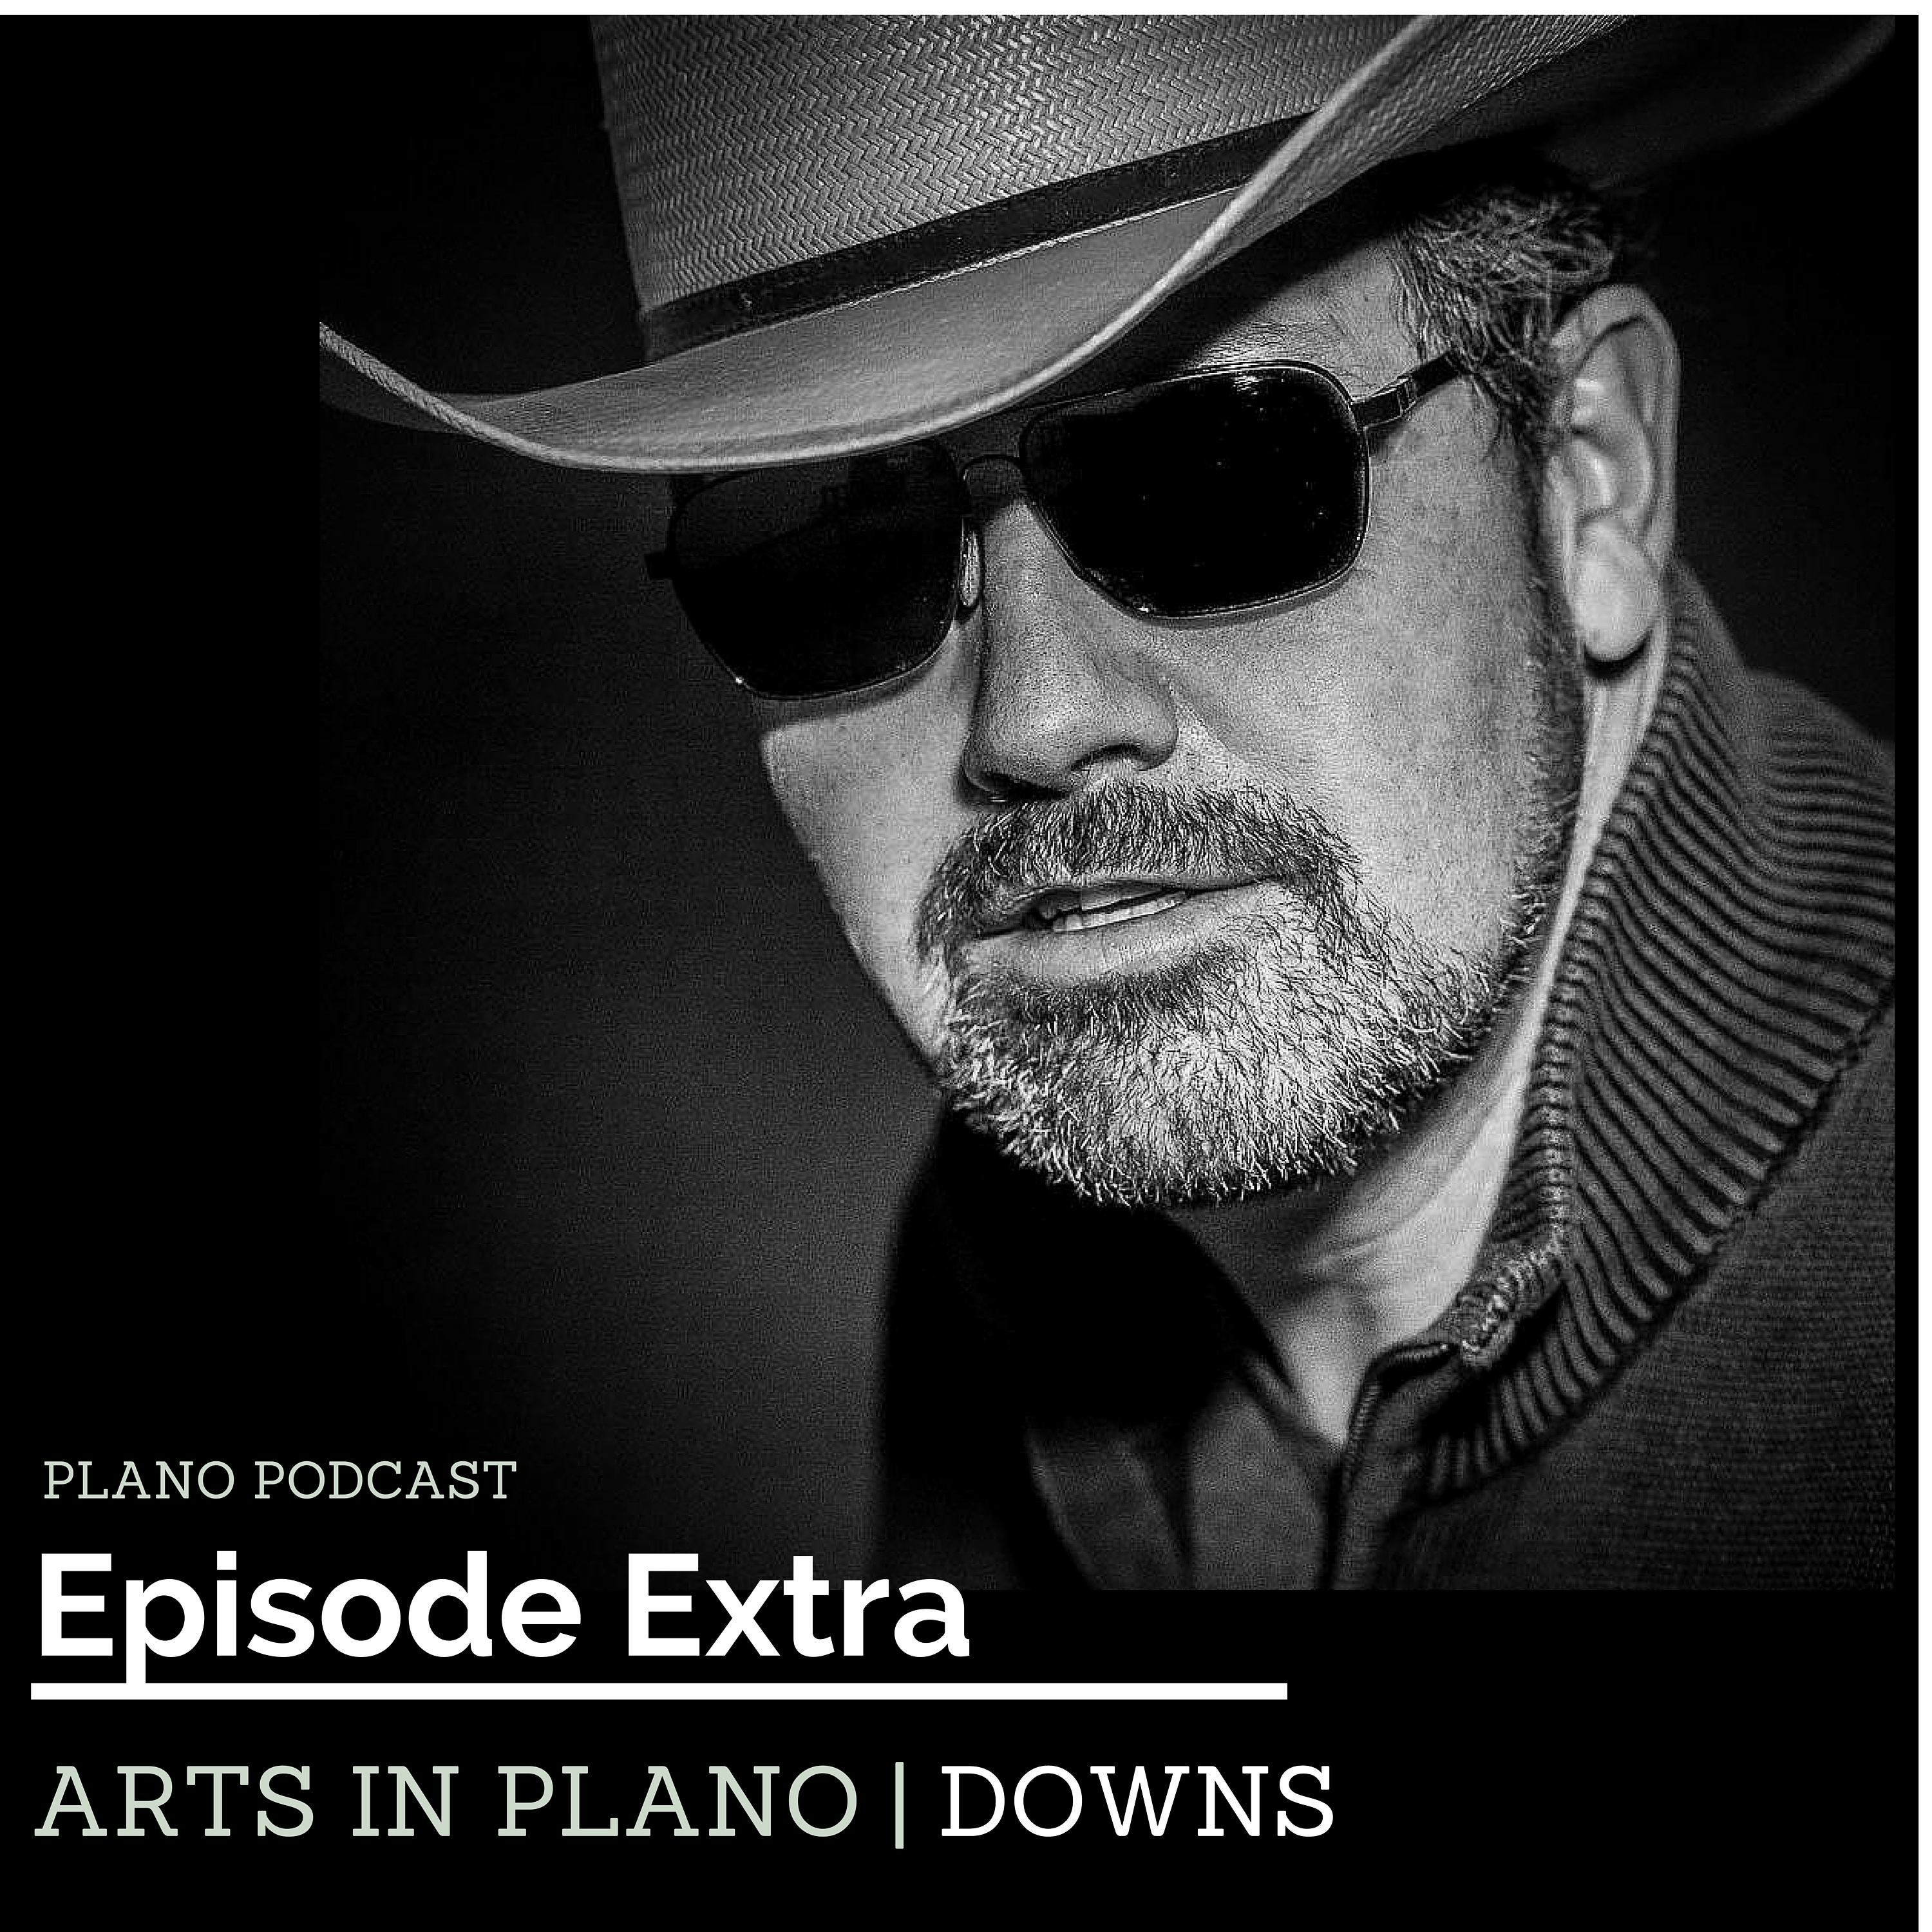 Episode 2 David Downs | Arts In Plano Extra